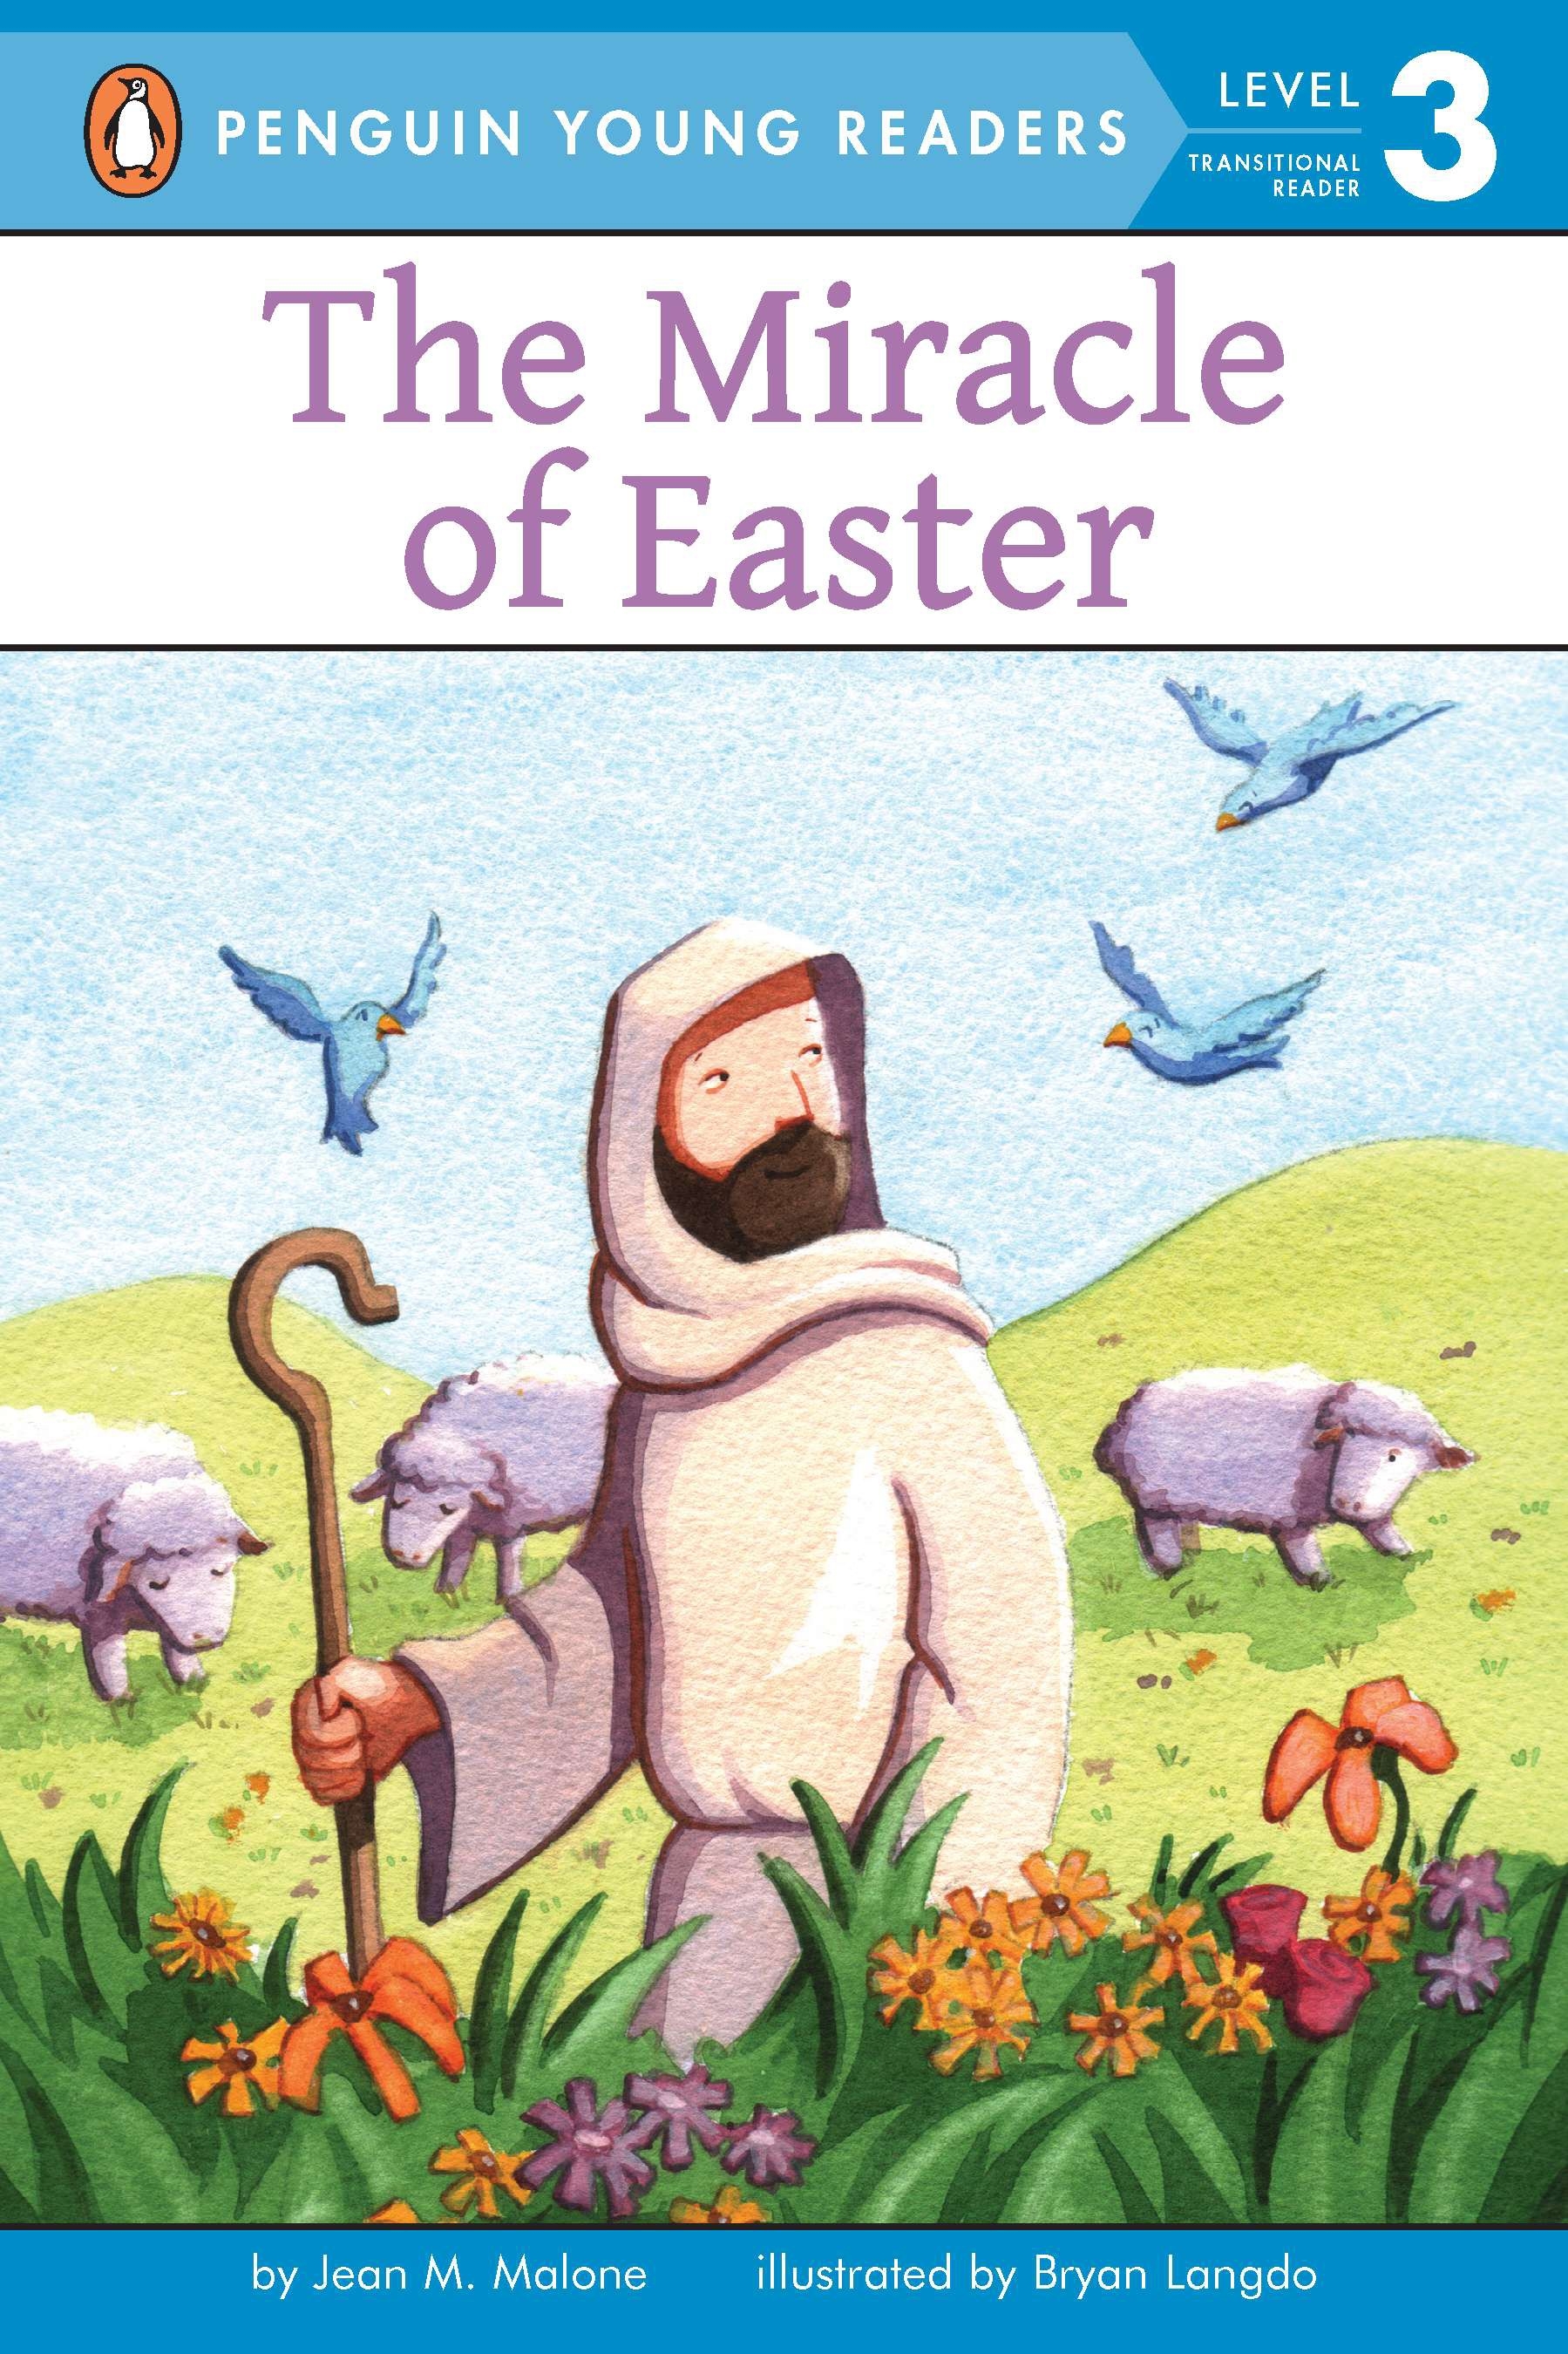 The Miracle of Easter by Jean M. Malone - Penguin Books Australia